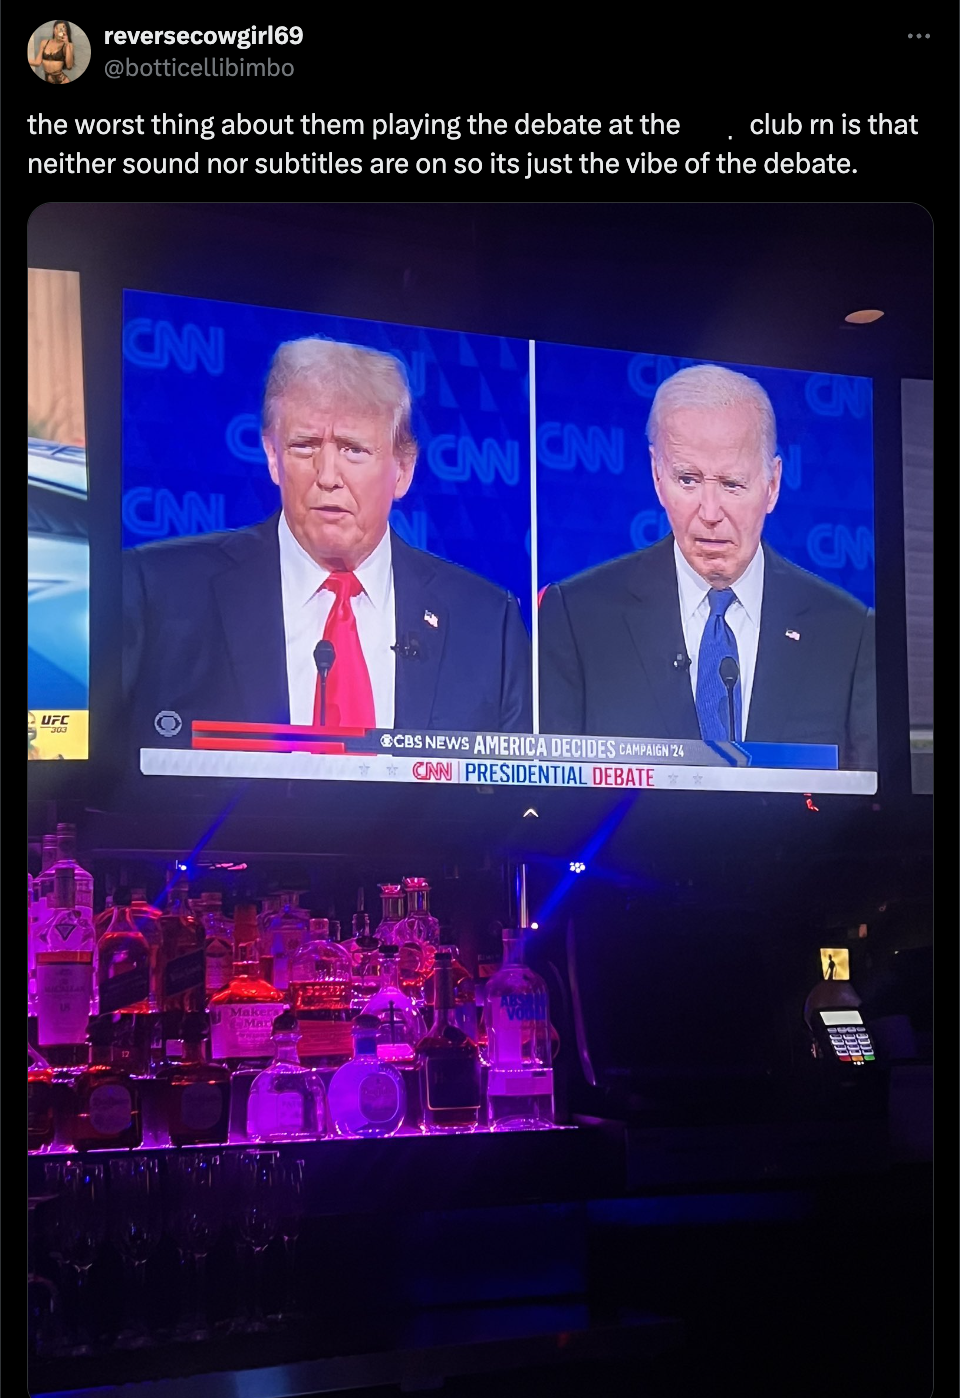 led-backlit lcd display - reversecowgirl69 the worst thing about them playing the debate at the club mn is that neither sound nor subtitles are on so its just the vibe of the debate. Can Cwon Can Cn Bcs News America Decues Ce Presidential Debate